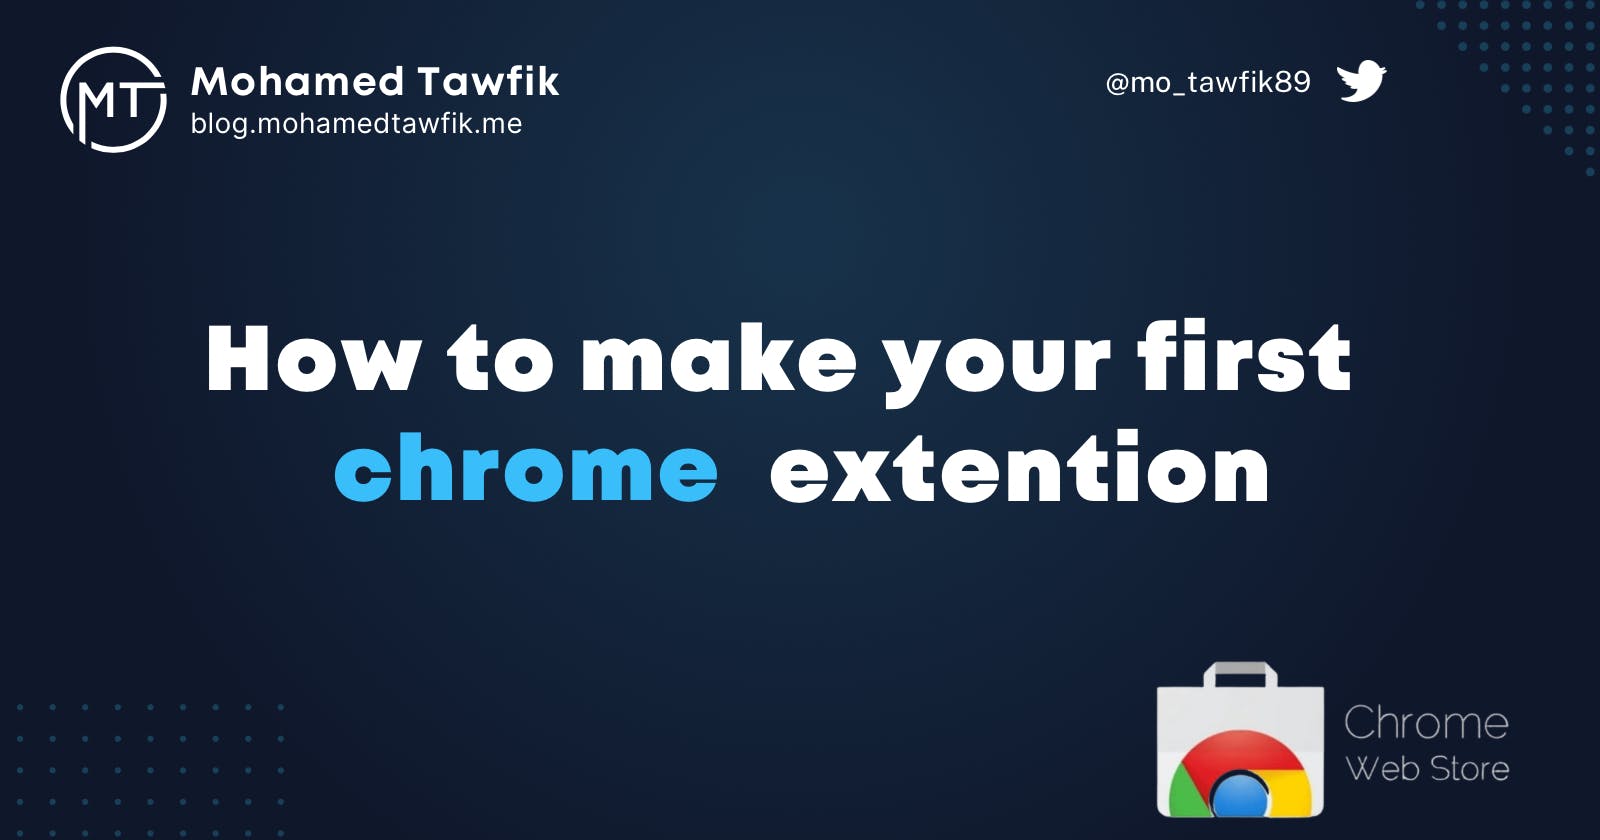 How to make your first chrome extension